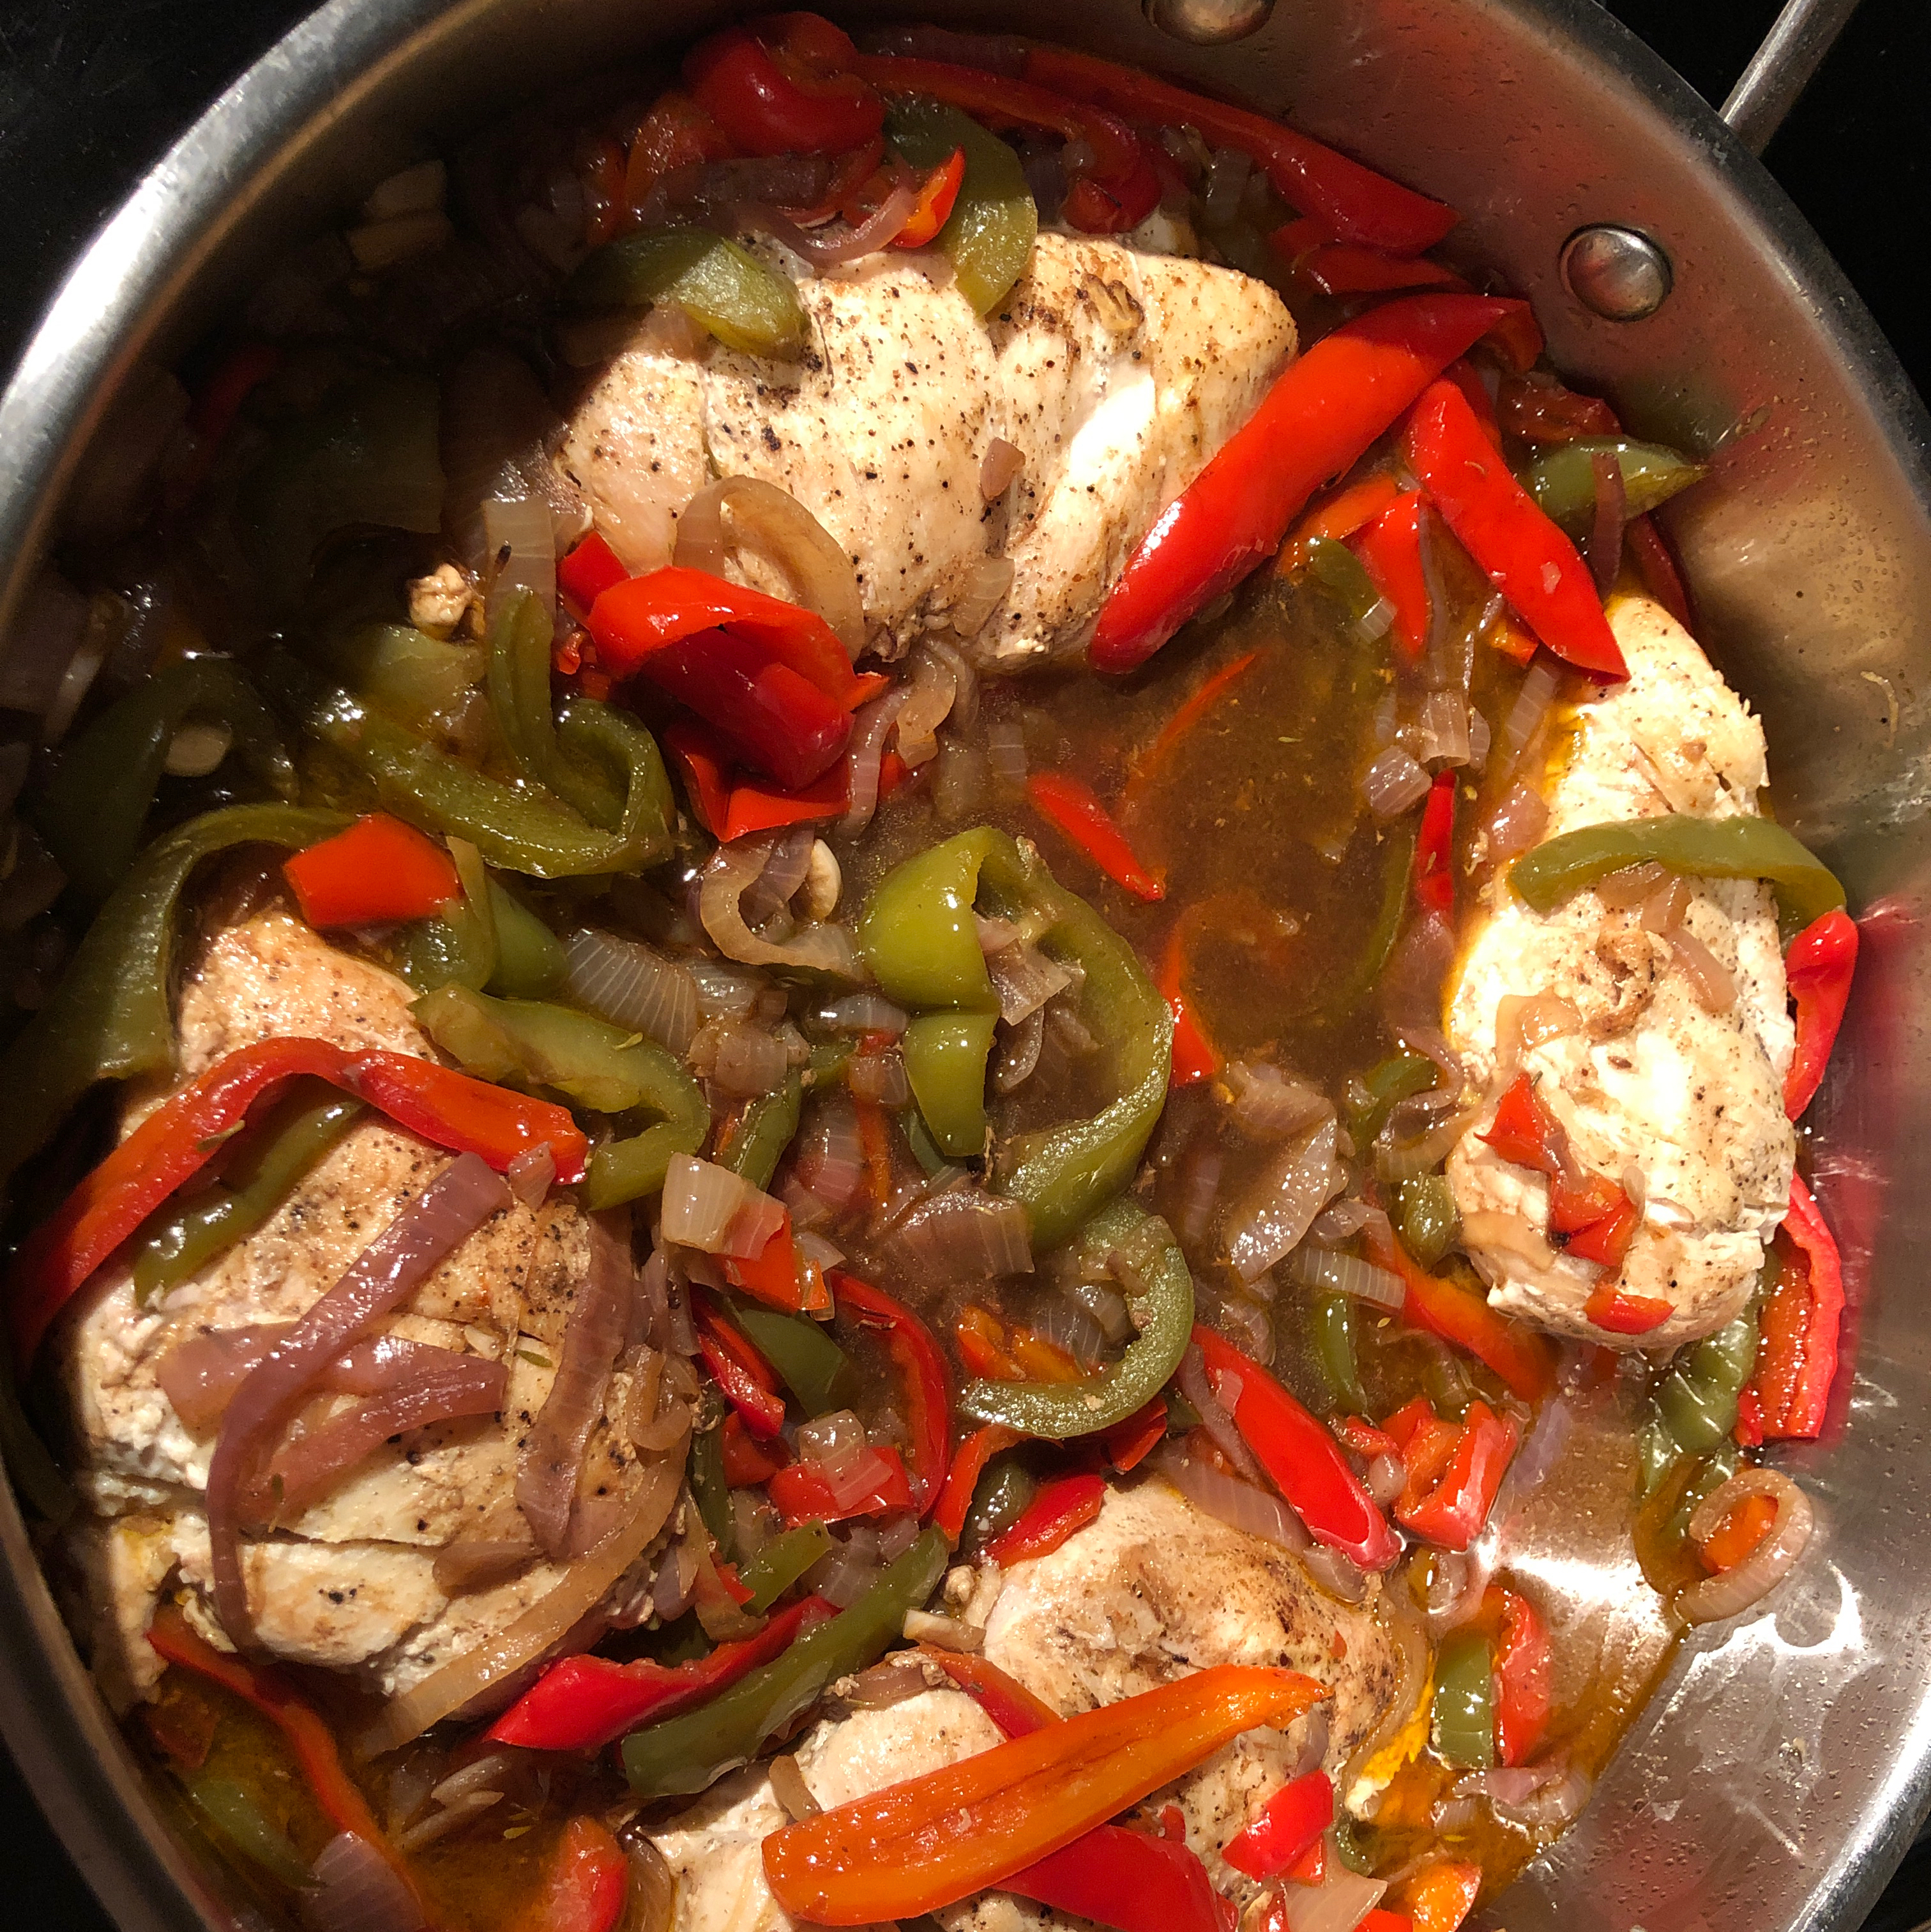 Chicken and Peppers with Balsamic Vinegar bazik03